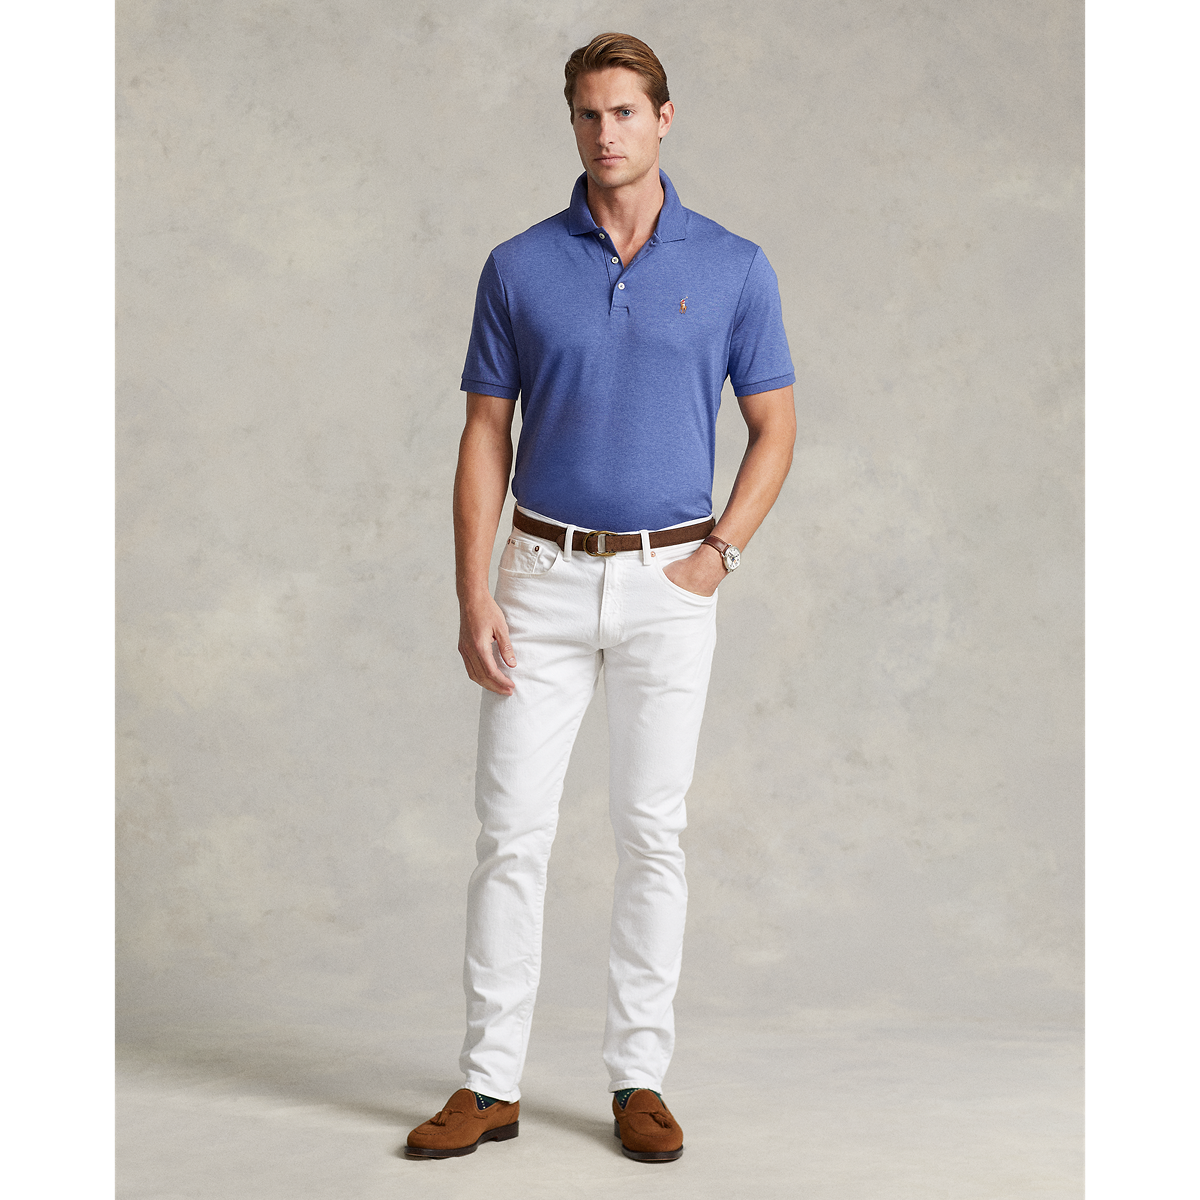 Ralph Lauren Soft Touch Polo - Classic Fit KSC53A Faded Royal Heather